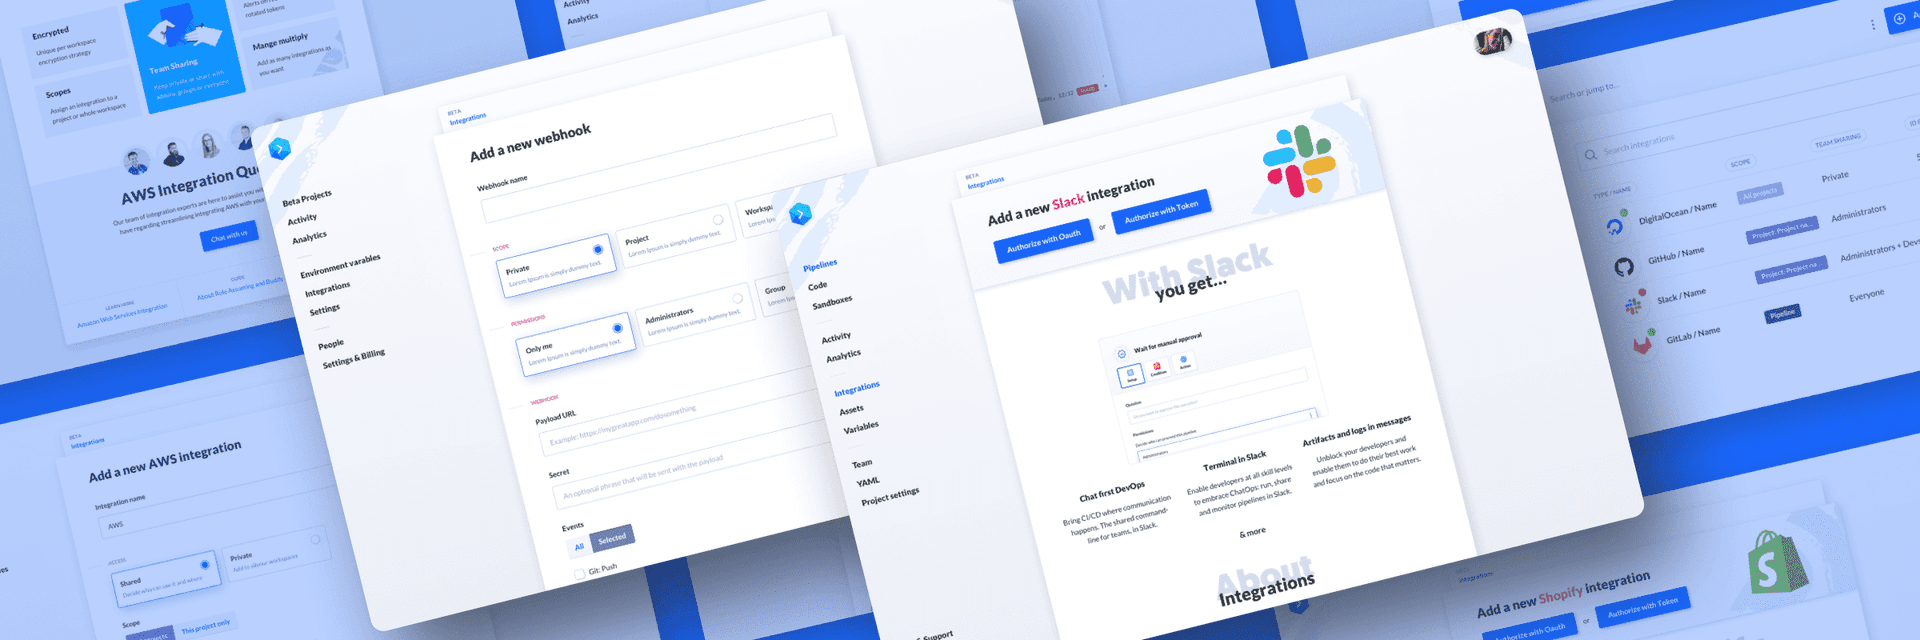 Buddy 2.0: Say hello to new integrations! 🔥